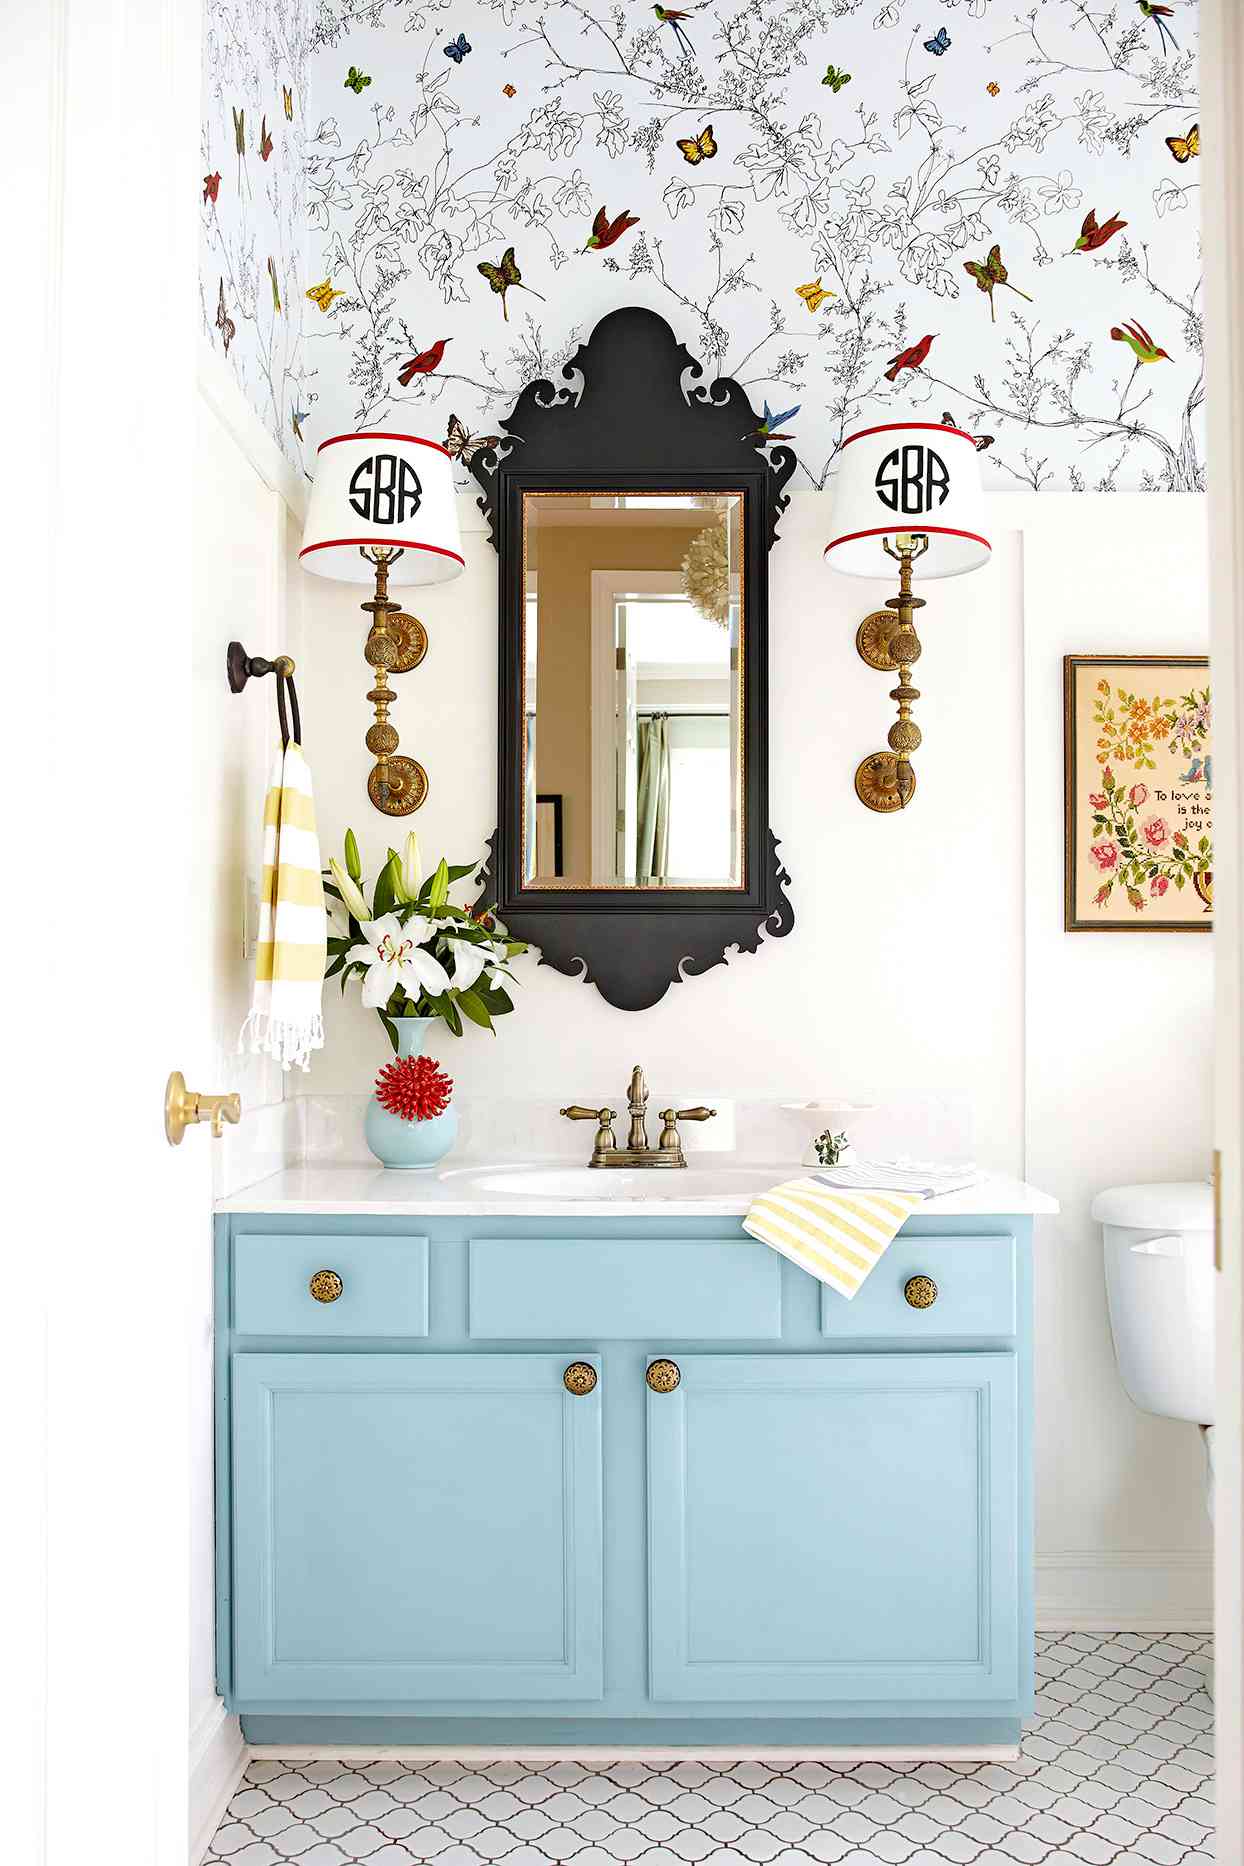 13 Before And After Vanity Makeovers, Old World Style Bathroom Vanity